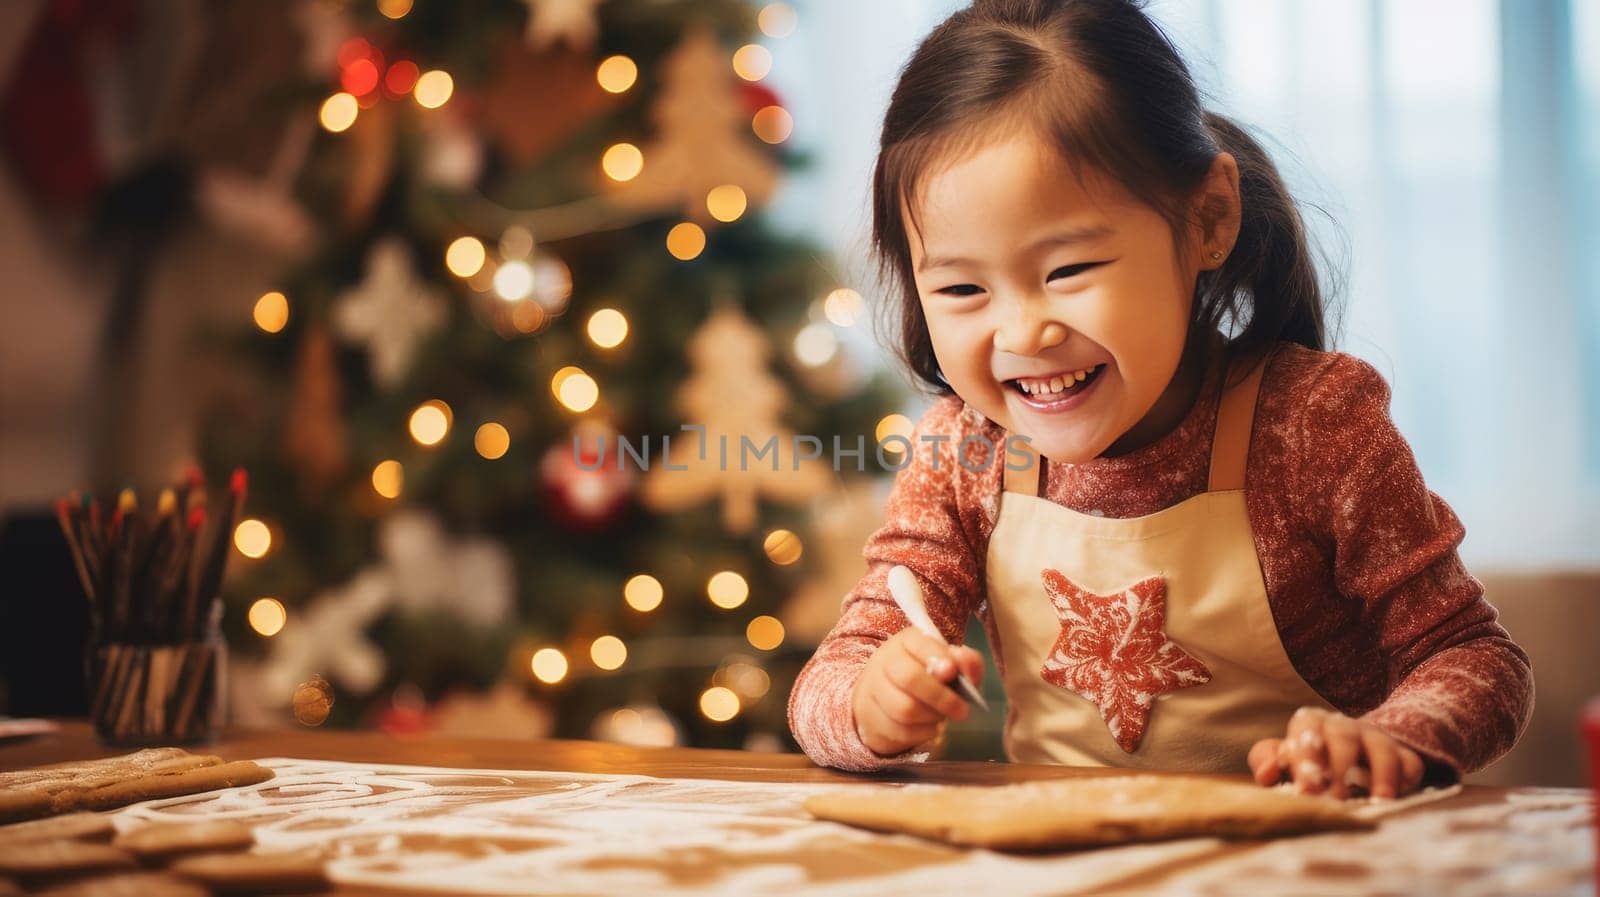 Smiling asian child with down syndrome decorates christmas cookies. Merry Christmas and Happy New Year concept. by Alla_Yurtayeva